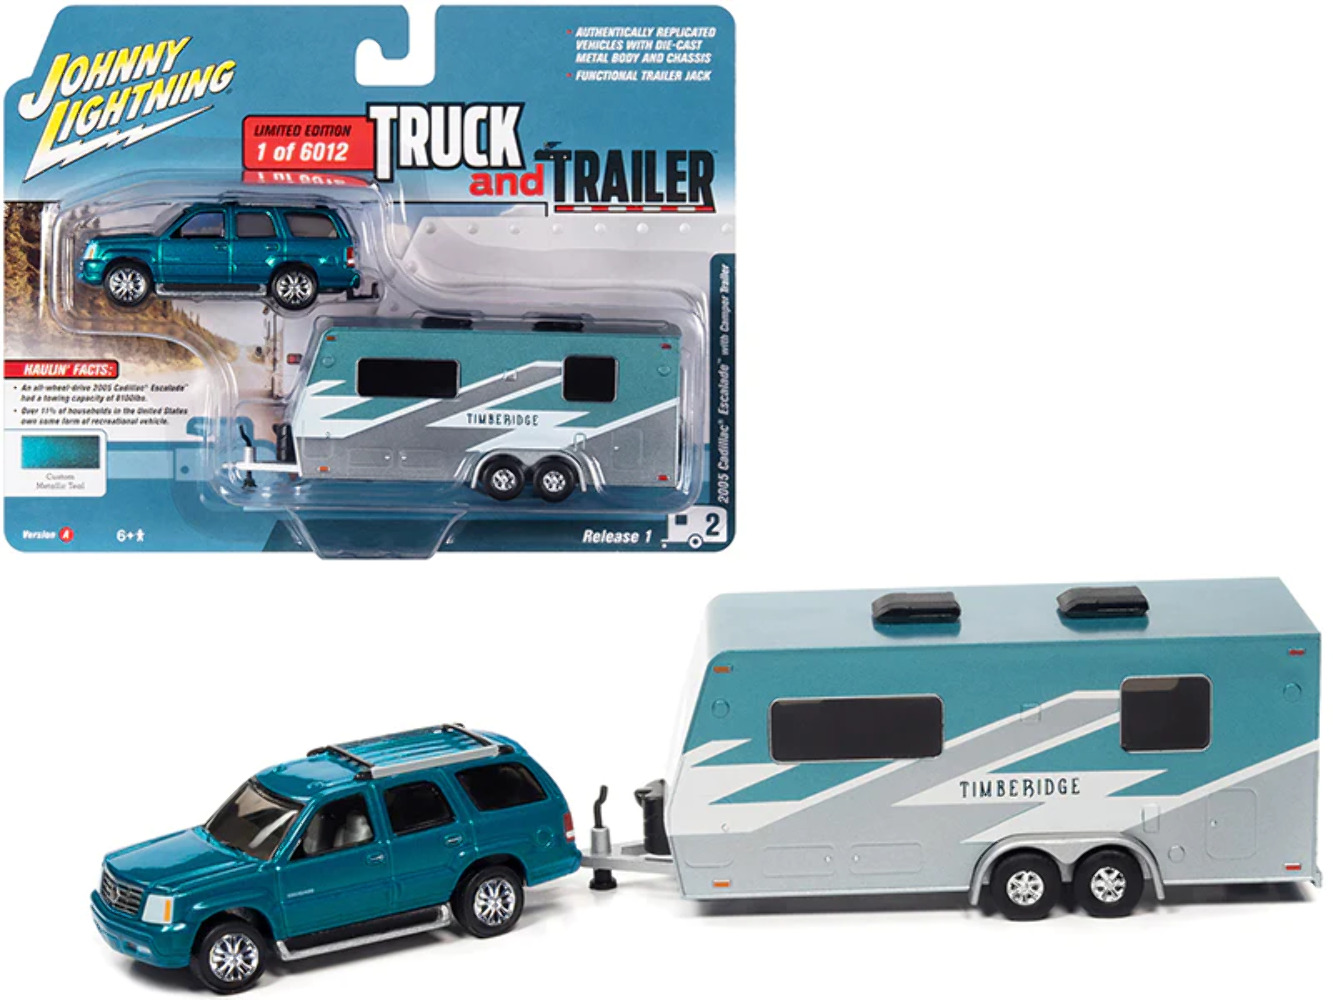 2005 Cadillac Escalade Teal Metallic with Camper Trailer Limited Edition to 6012